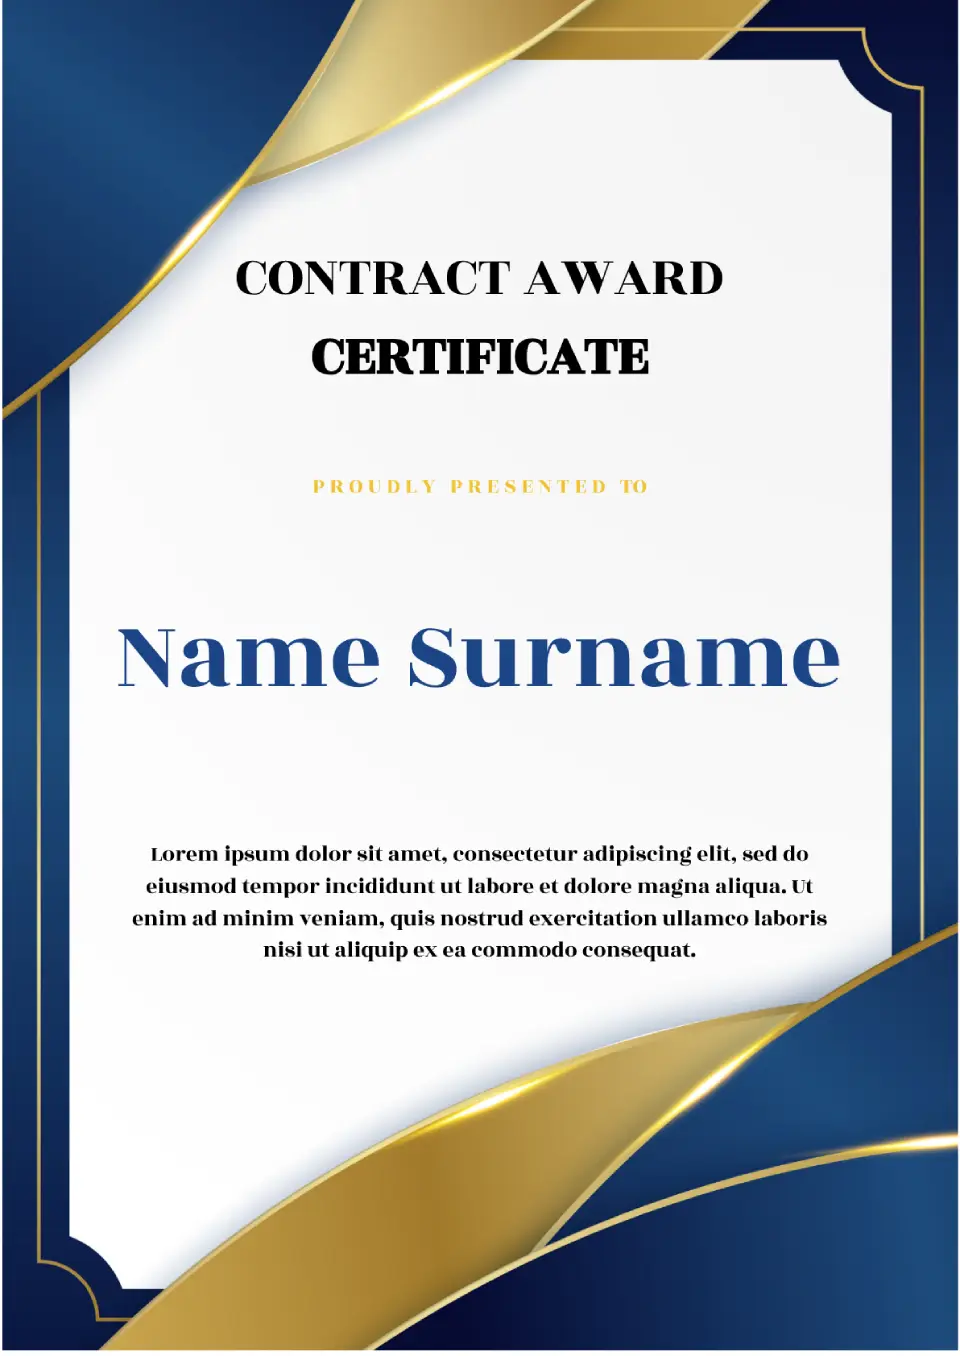 Contract Award Certificate Template for Google Docs